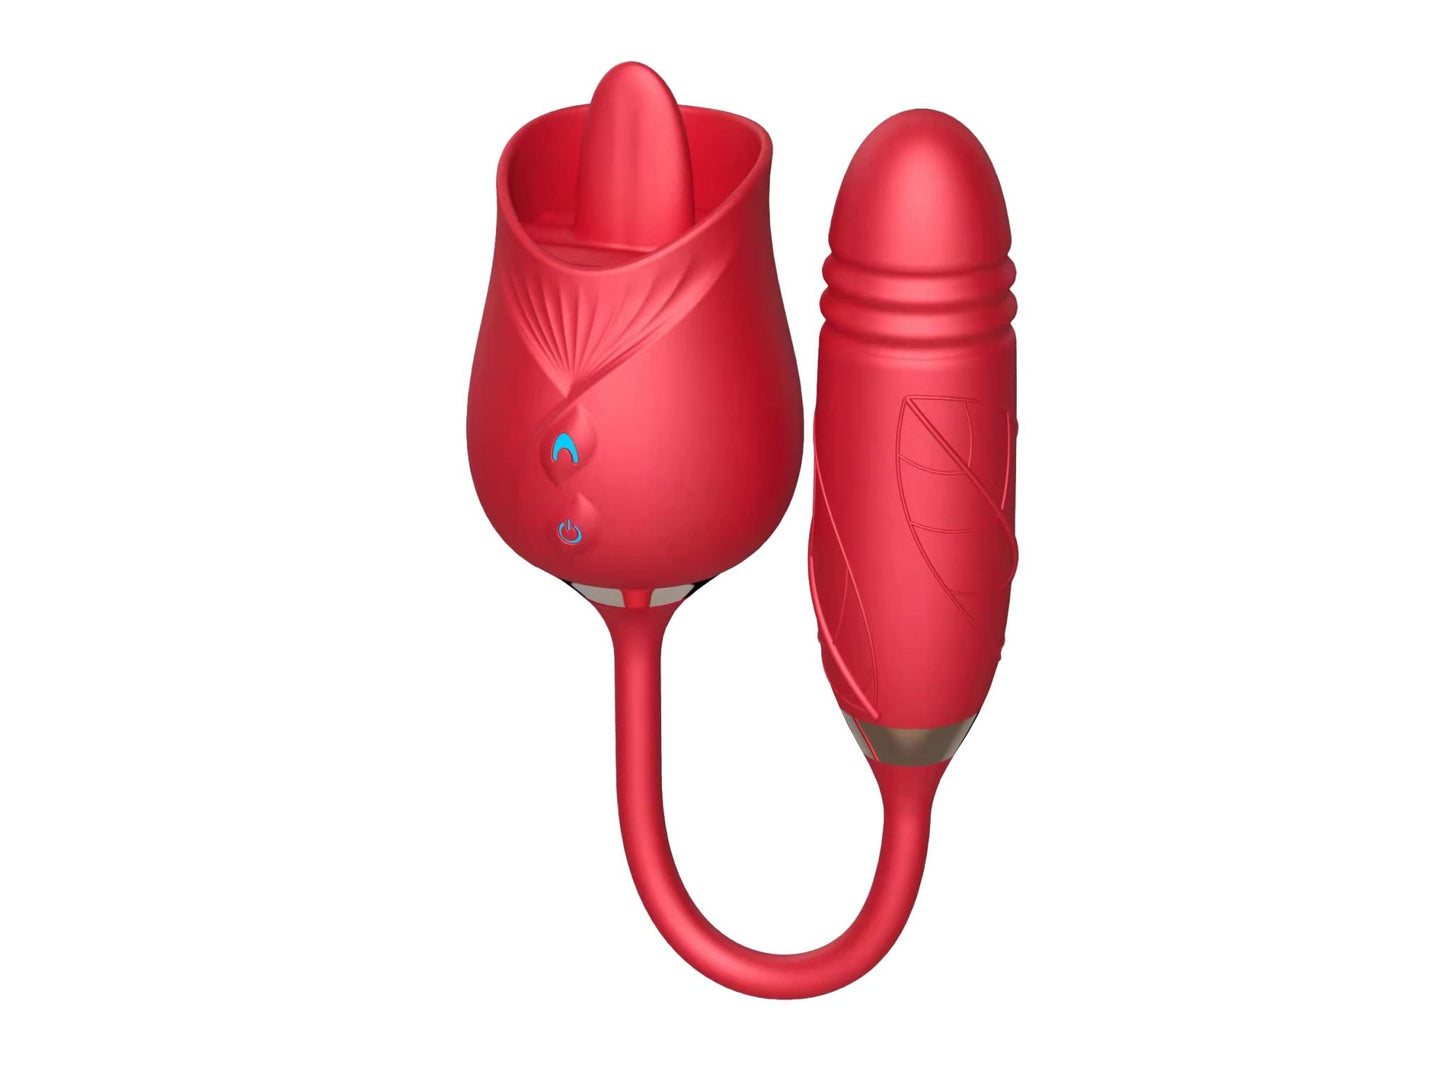 Tulip Toy for Women - Thrusting & Sucking Vibratorfor amazing orgasms! The Pleaser Pro